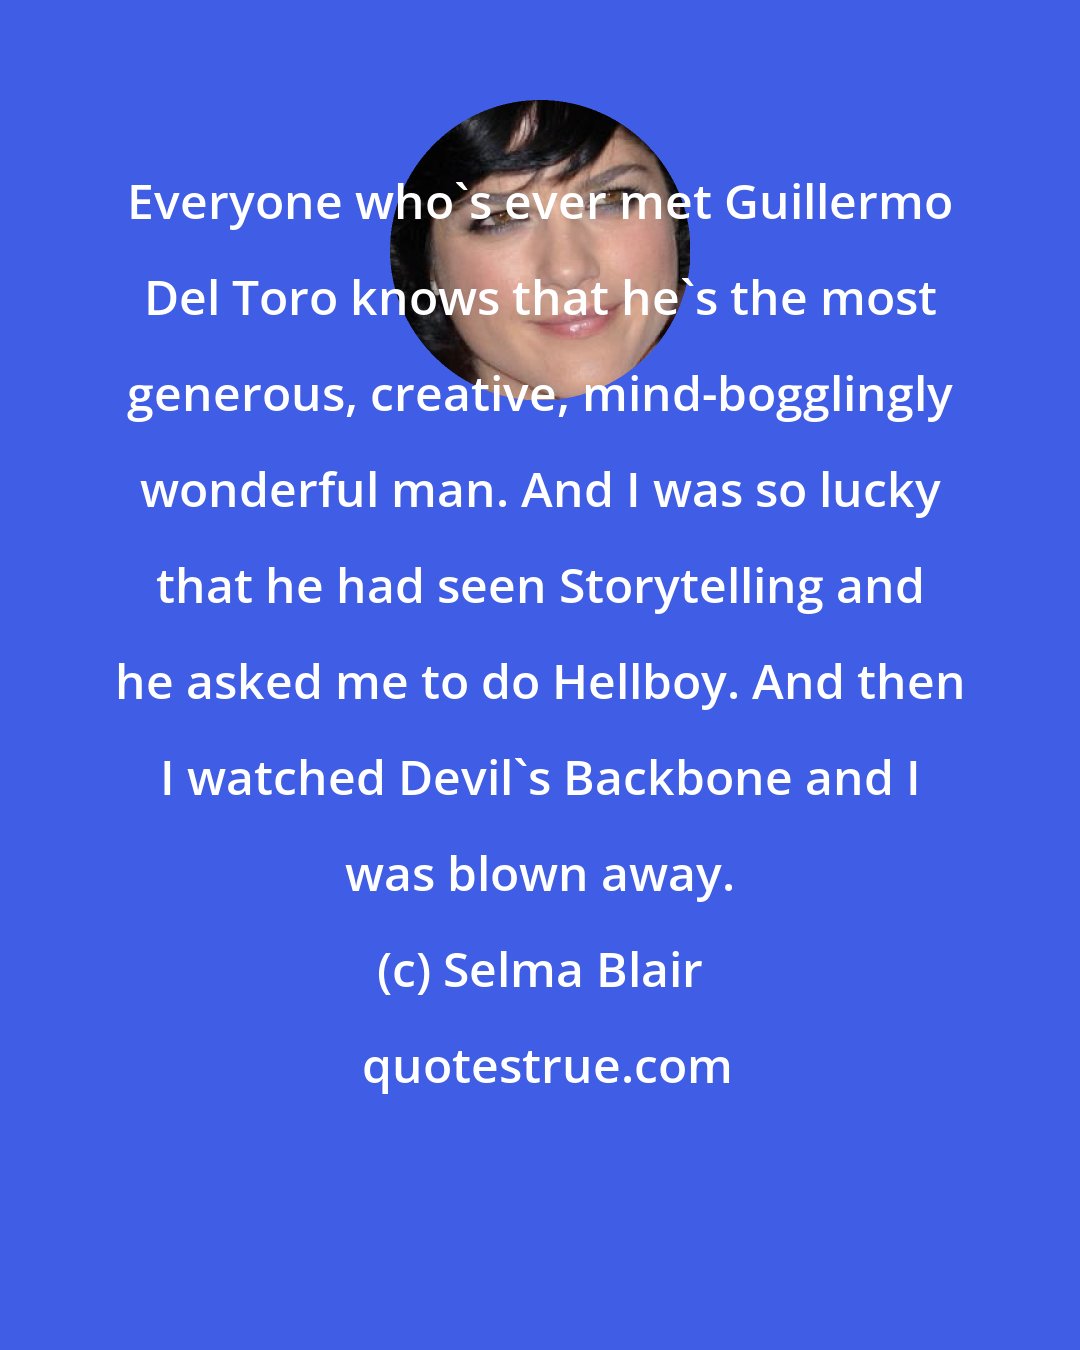 Selma Blair: Everyone who's ever met Guillermo Del Toro knows that he's the most generous, creative, mind-bogglingly wonderful man. And I was so lucky that he had seen Storytelling and he asked me to do Hellboy. And then I watched Devil's Backbone and I was blown away.